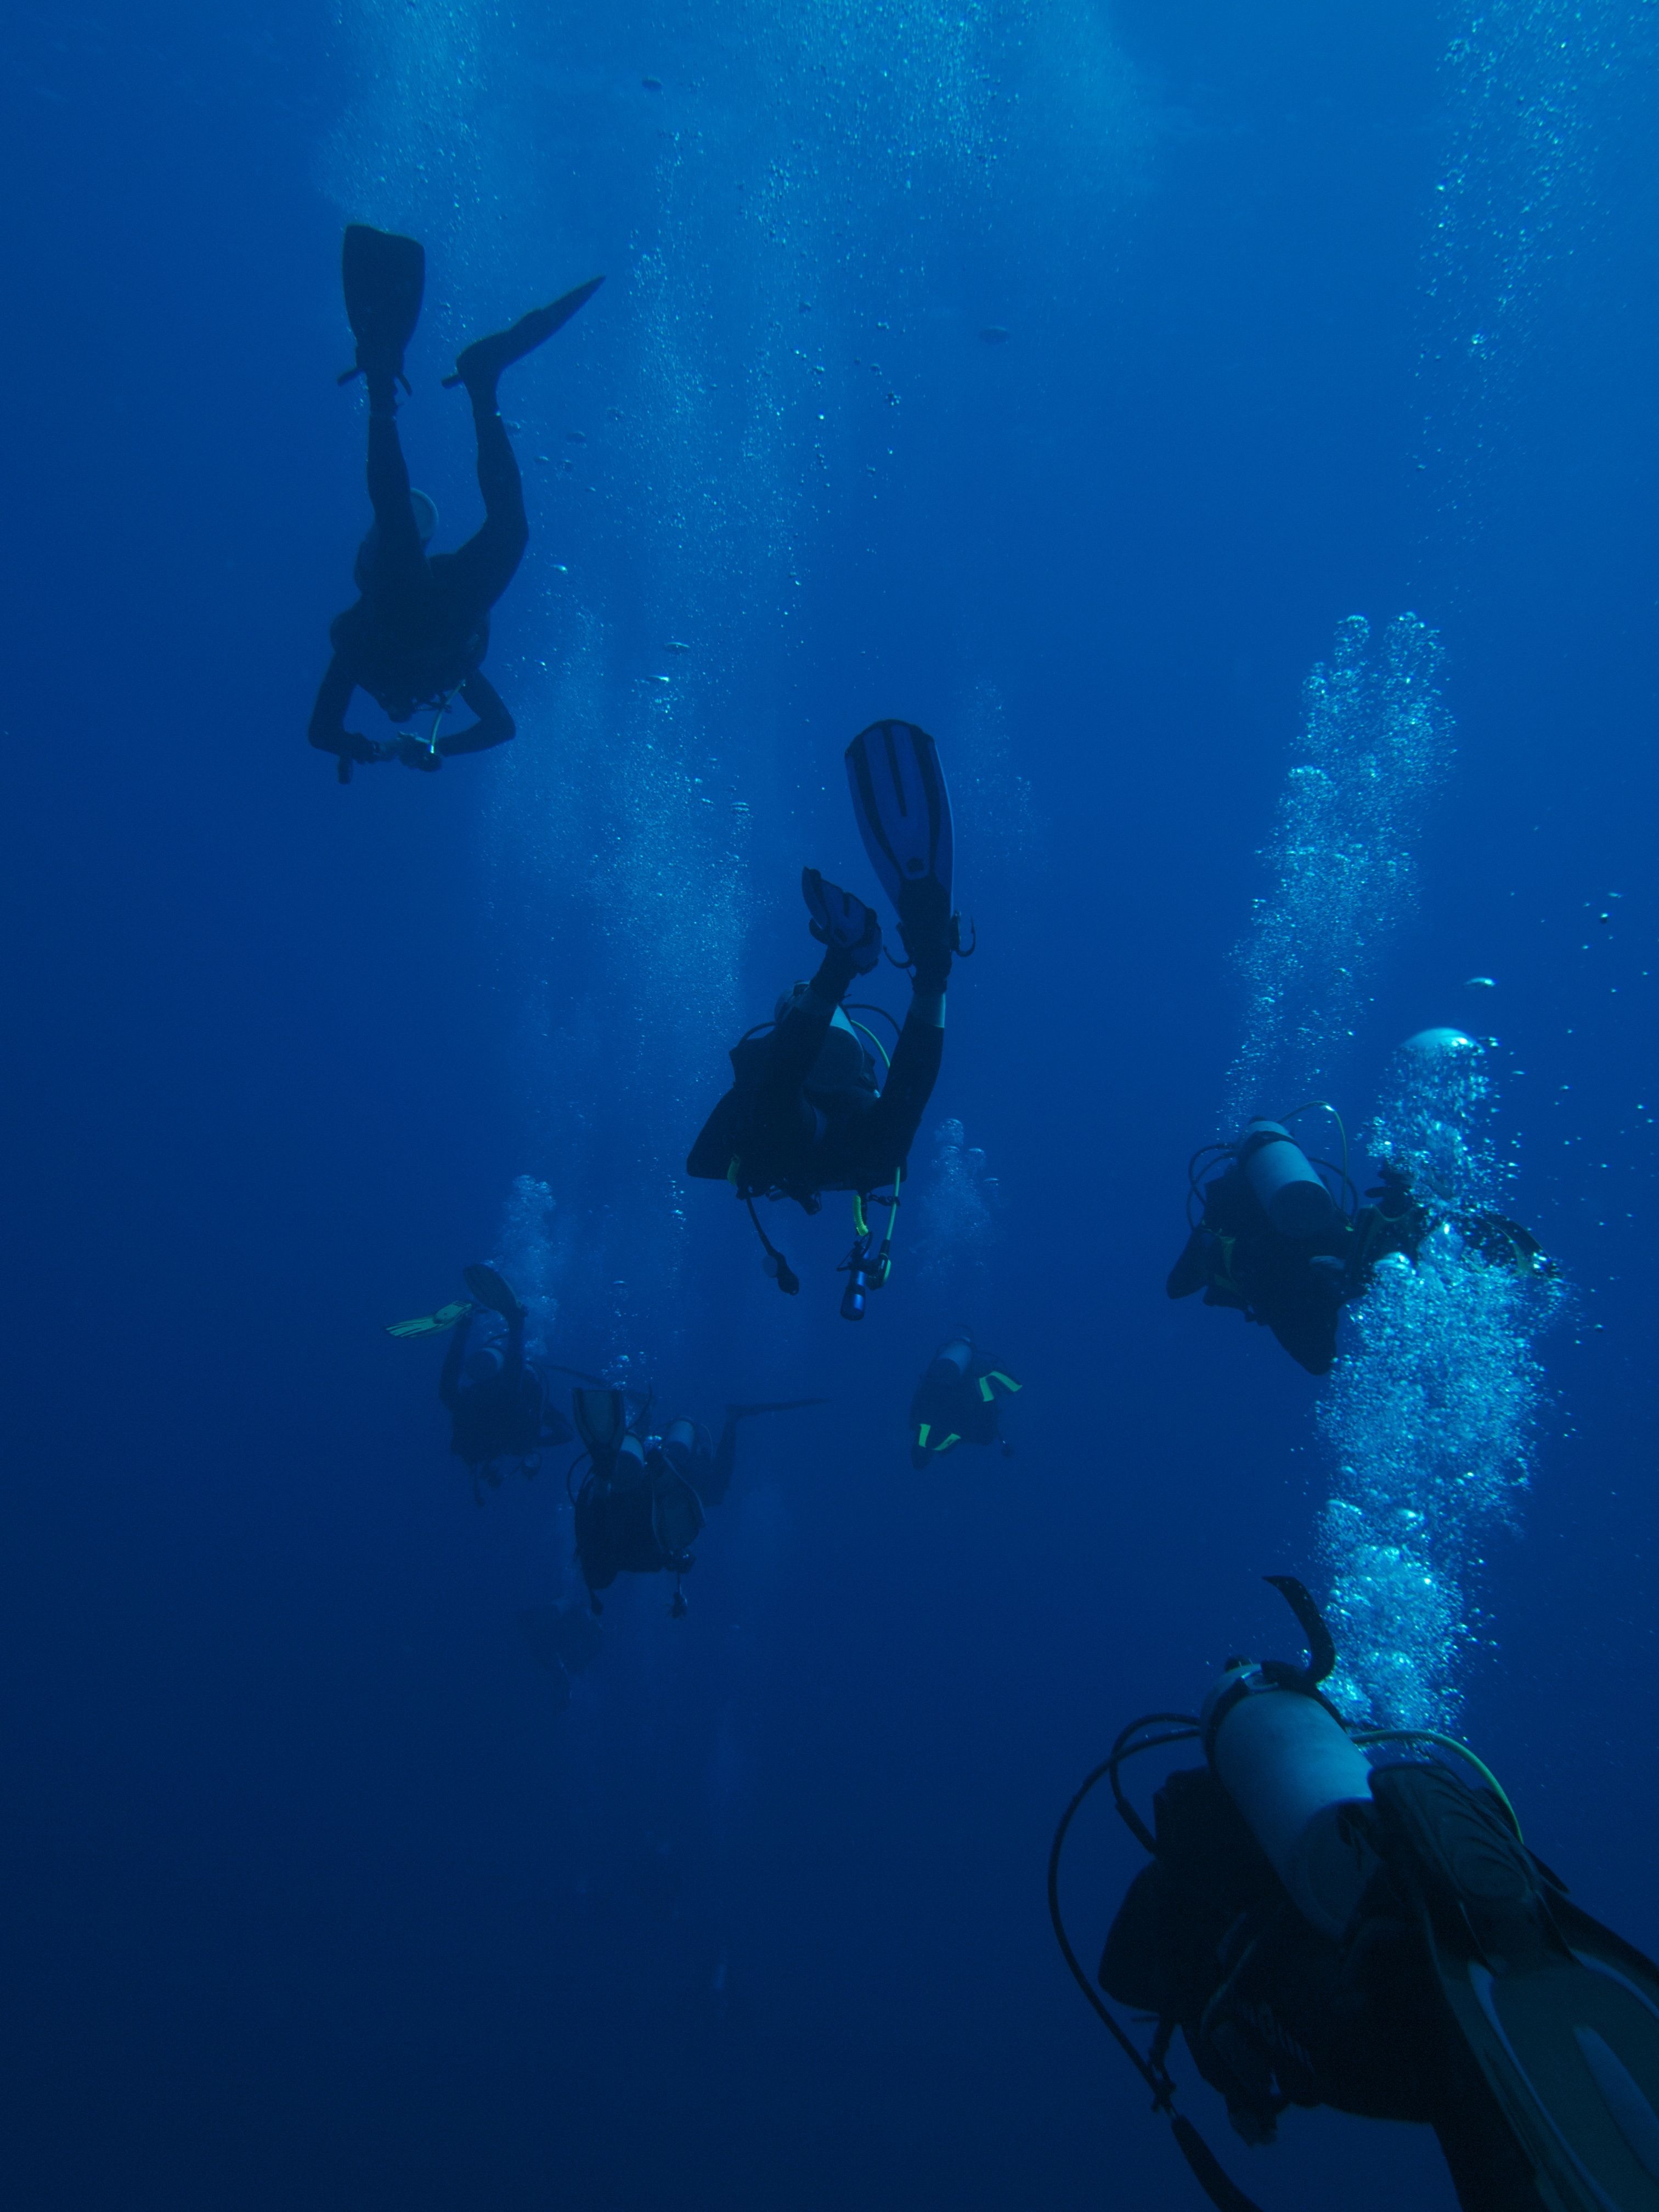 Several divers avoid the most common cause of diving accidents by practicing safe diving techniques